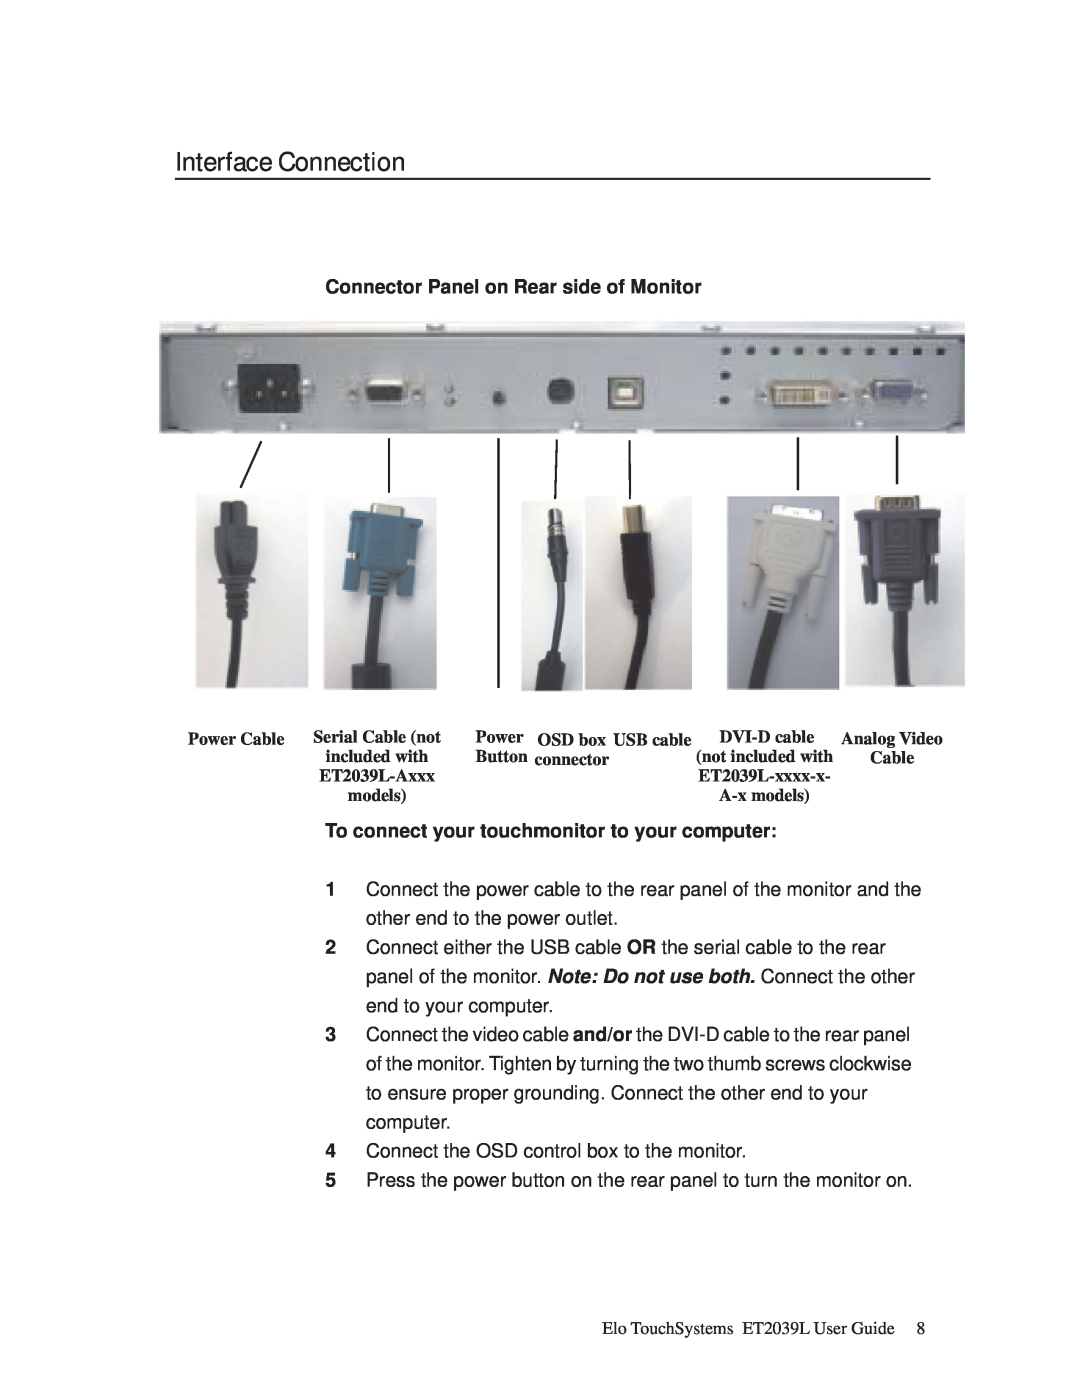 Elo TouchSystems ET2039L manual Interface Connection, Connector Panel on Rear side of Monitor 